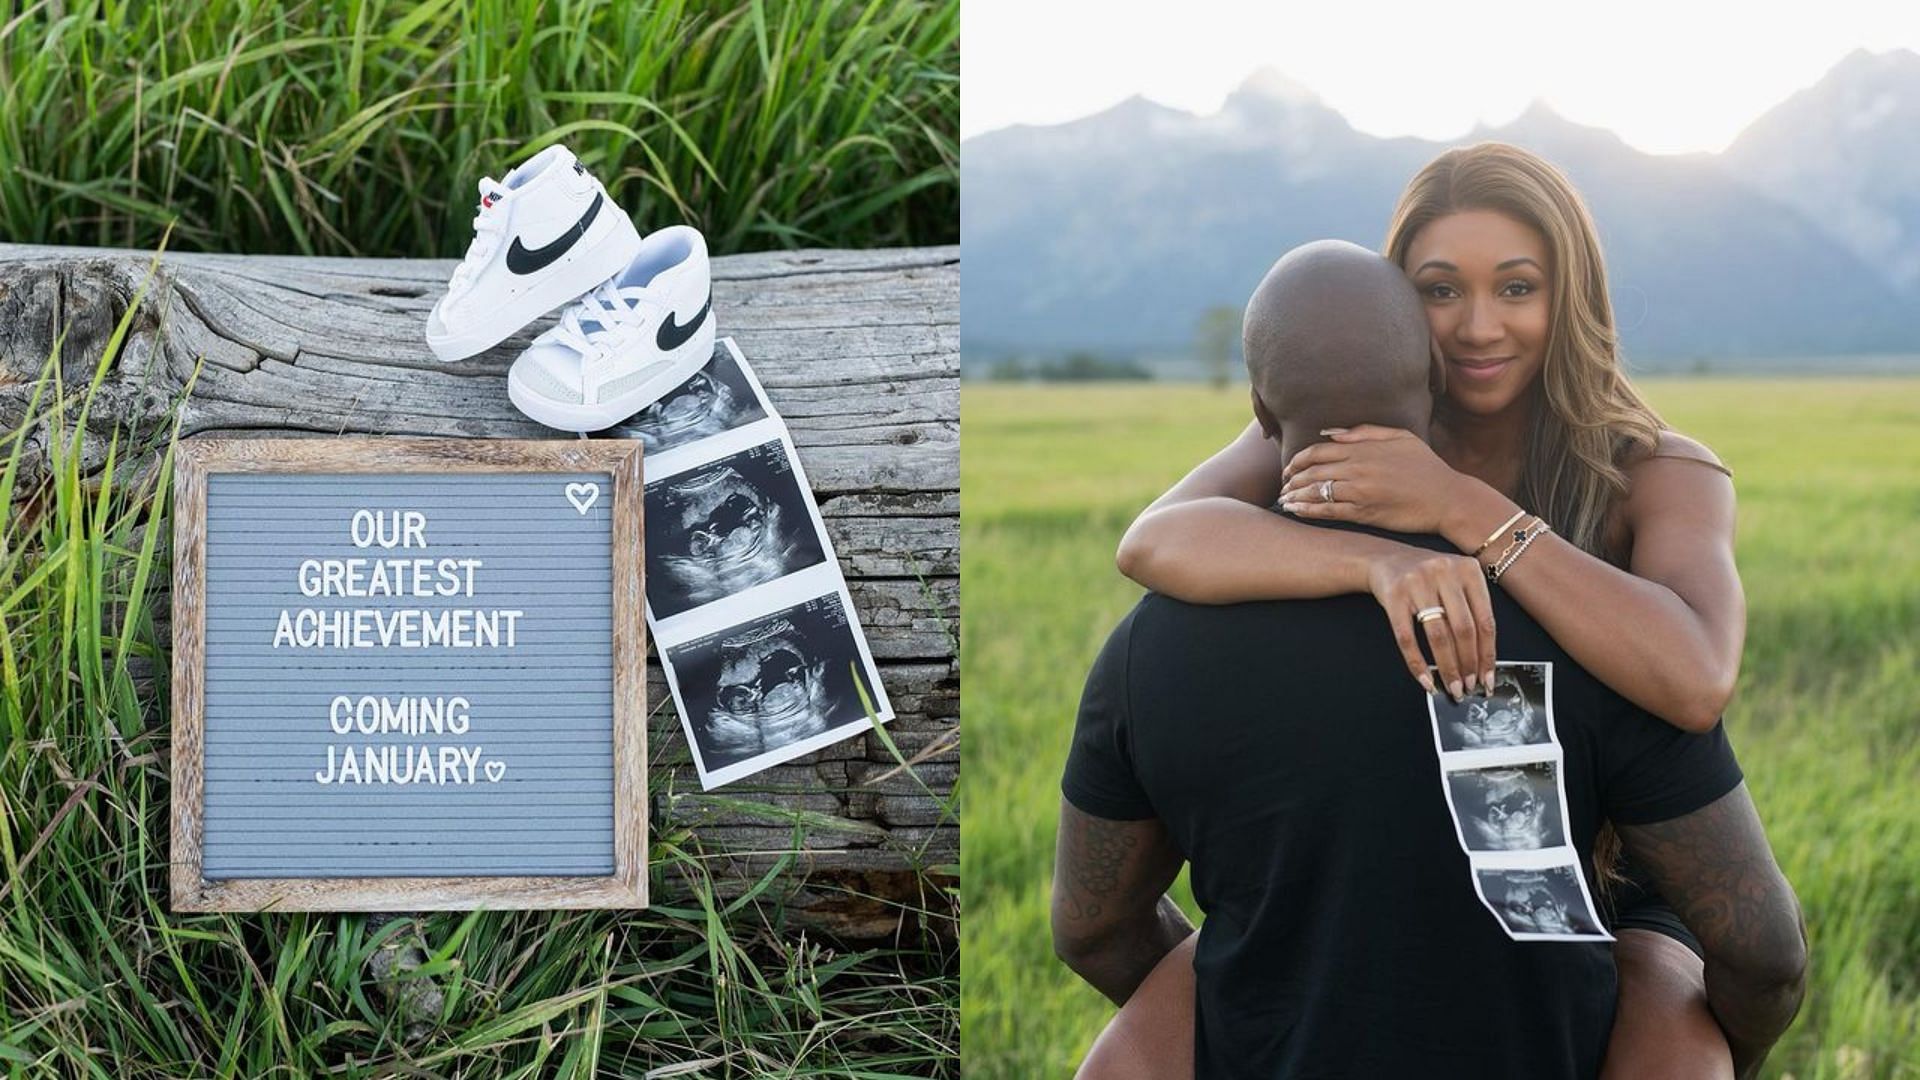 NFL reporter Maria Taylor reveals first pregnancy